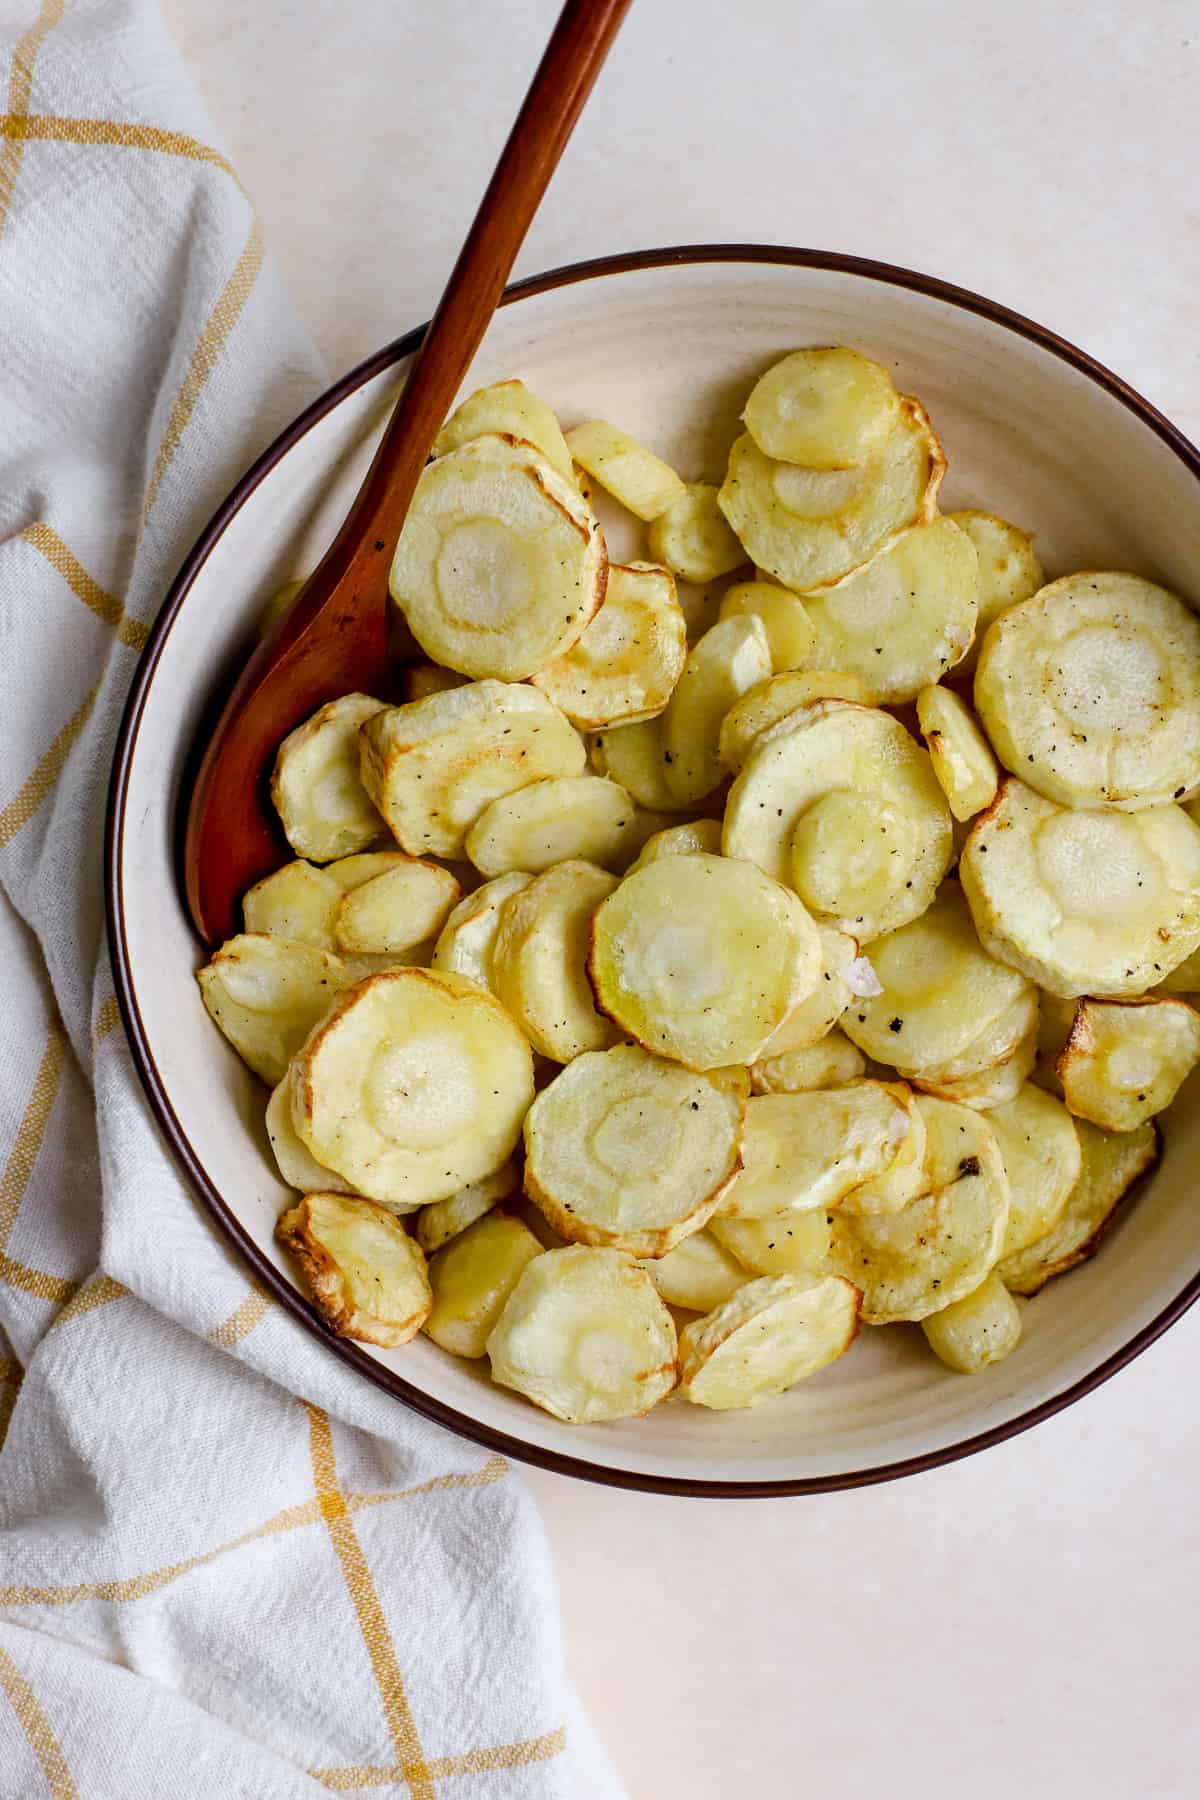 Air fryer parsnips in beige serving bowl with wooden spoon and yellow and white checked linen on the surface.